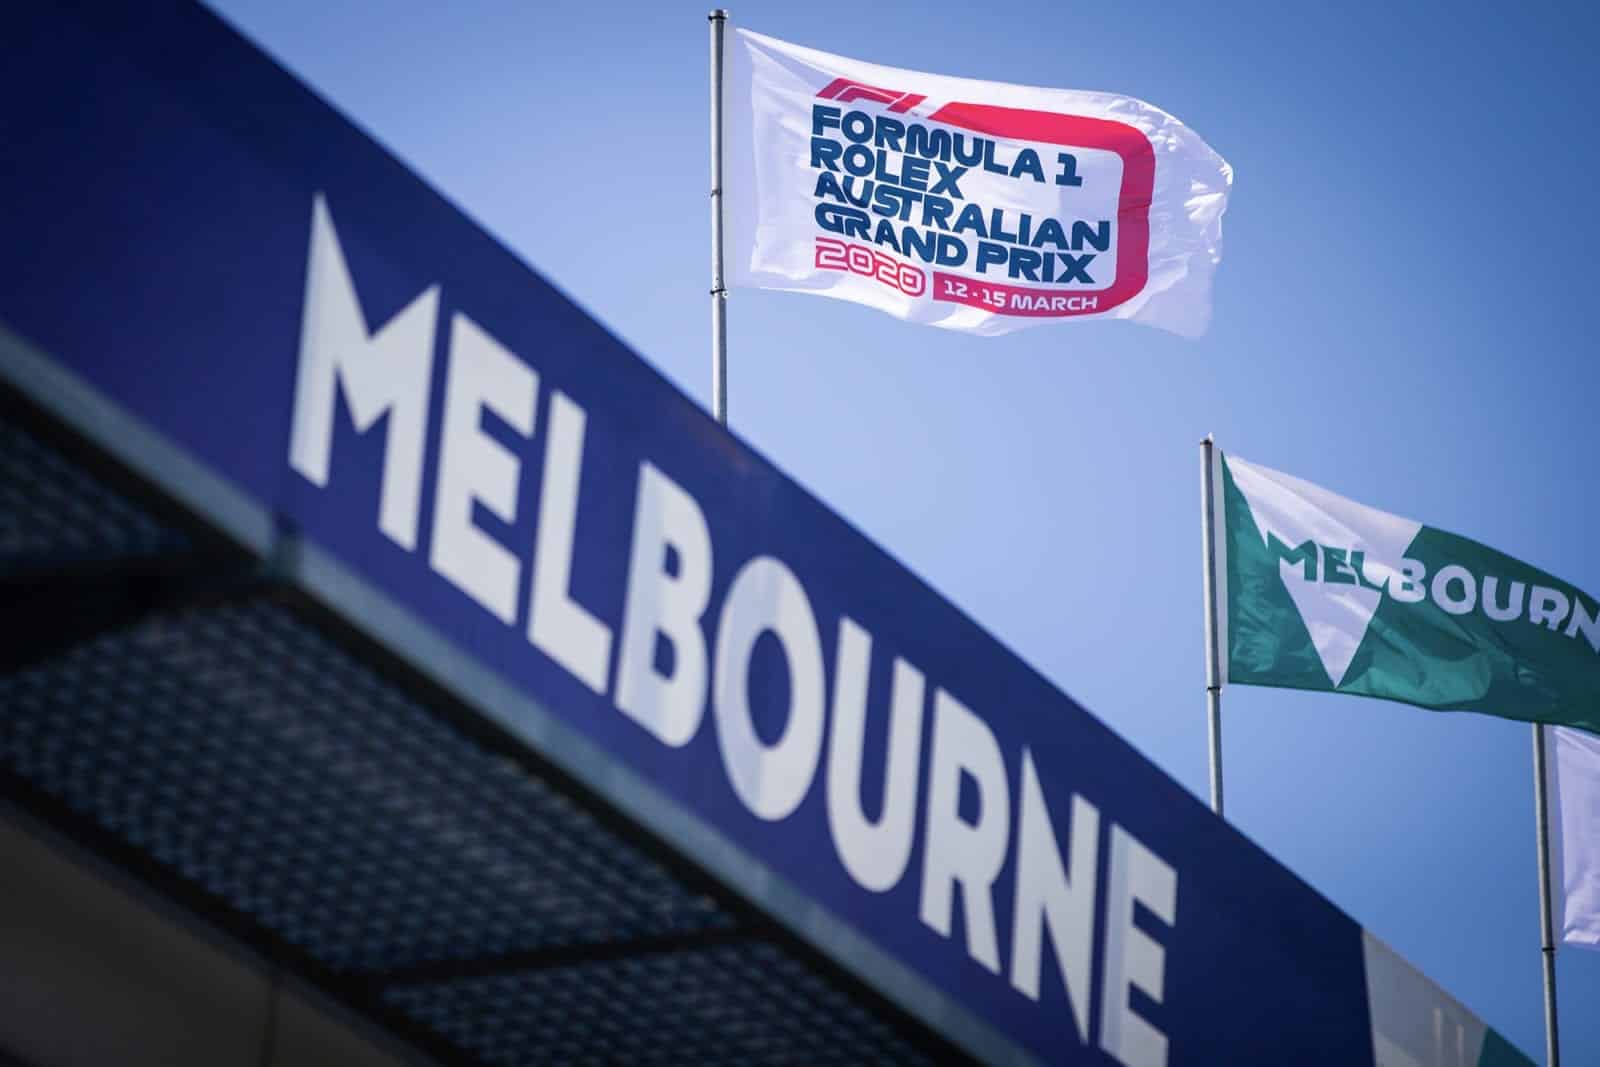 Flags above a Melbourne grandstand ahead of the 2020 Australian Grand Prix